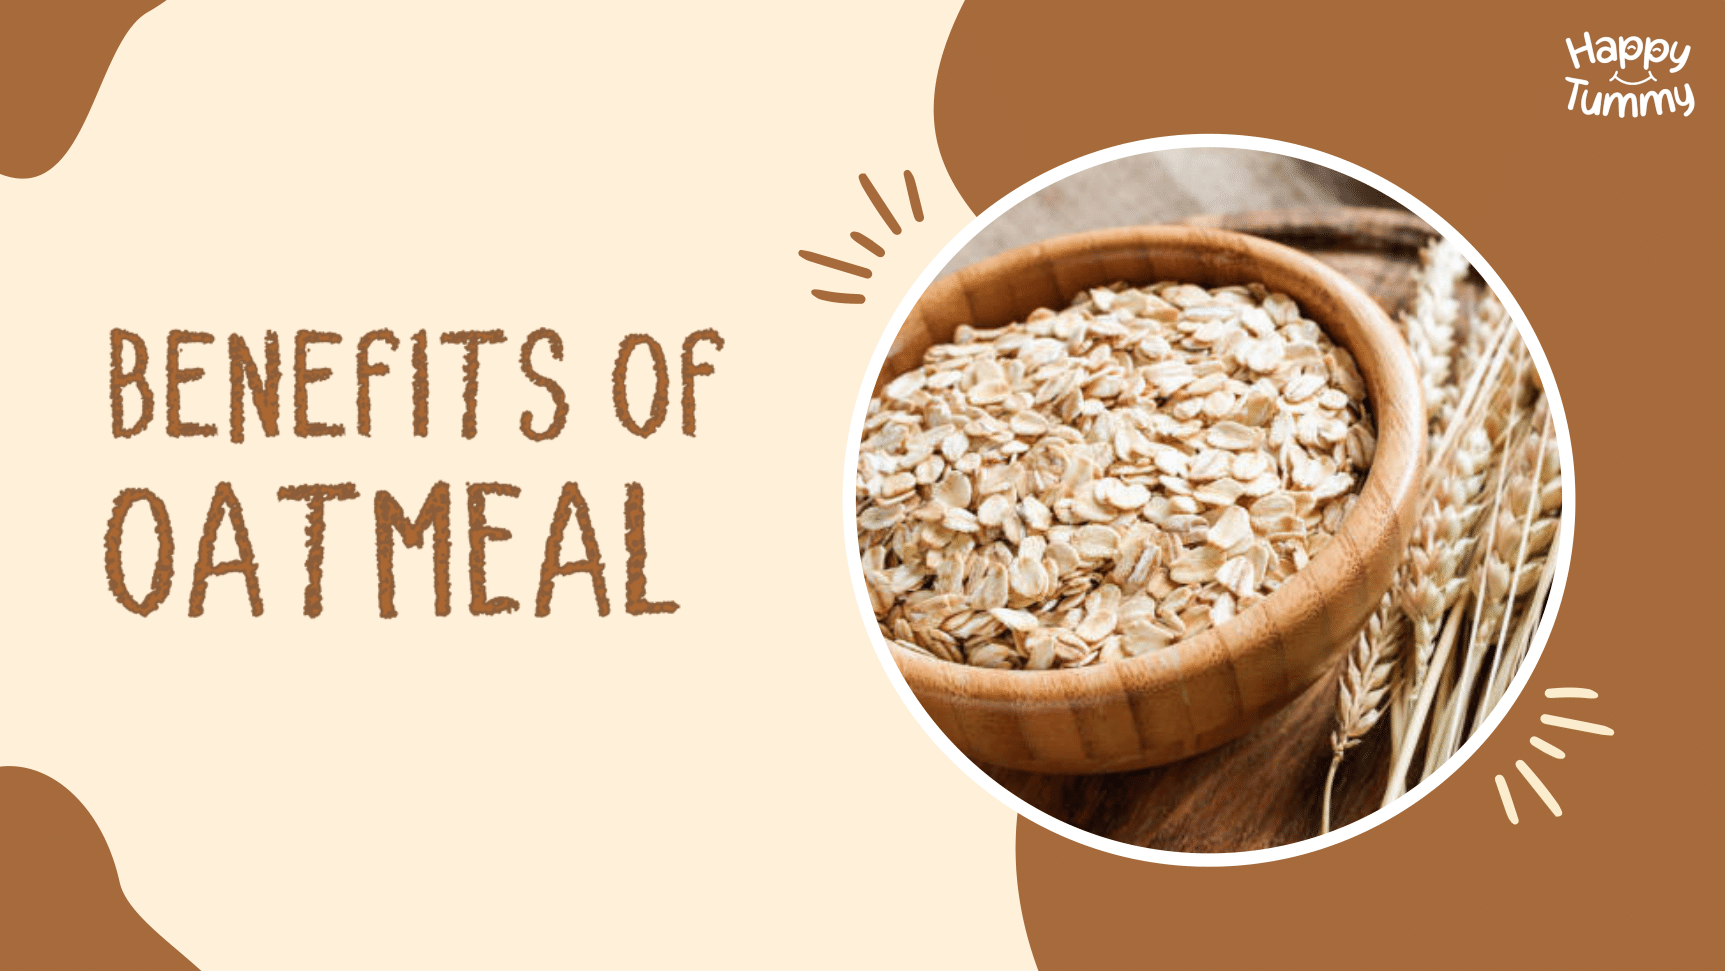 Oatmeal Exposed: Nutrition, Weight Loss, Health, and Calories!